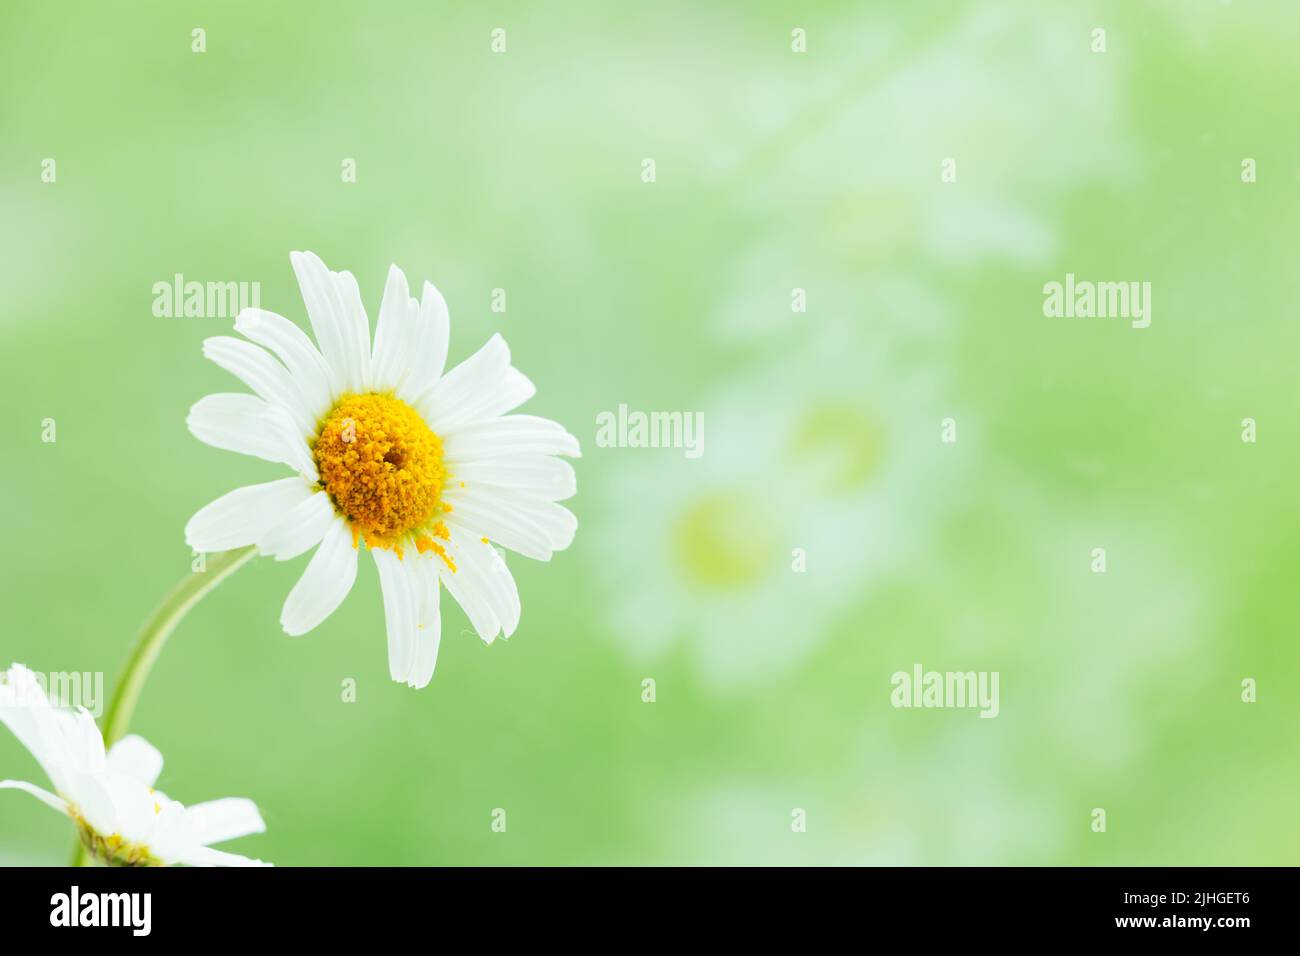 White daisy flowers against a vibrant green field with reflection of flowers in glass, with copy space Stock Photo